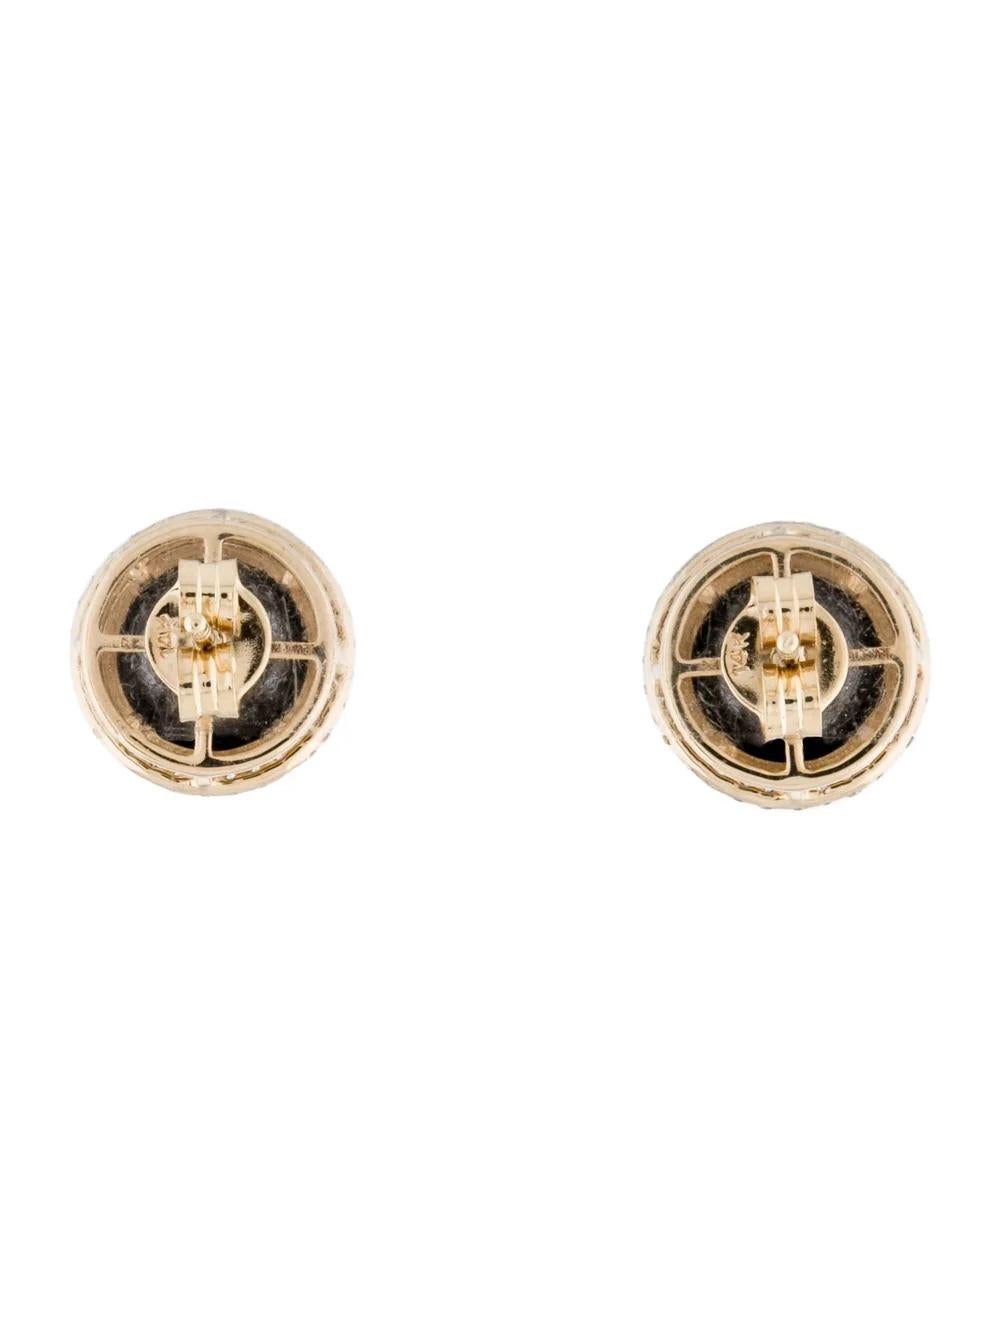 14K Diamond Stud Earrings - 7.46ctw - Timeless &  Elegant Statement Jewelry In New Condition For Sale In Holtsville, NY